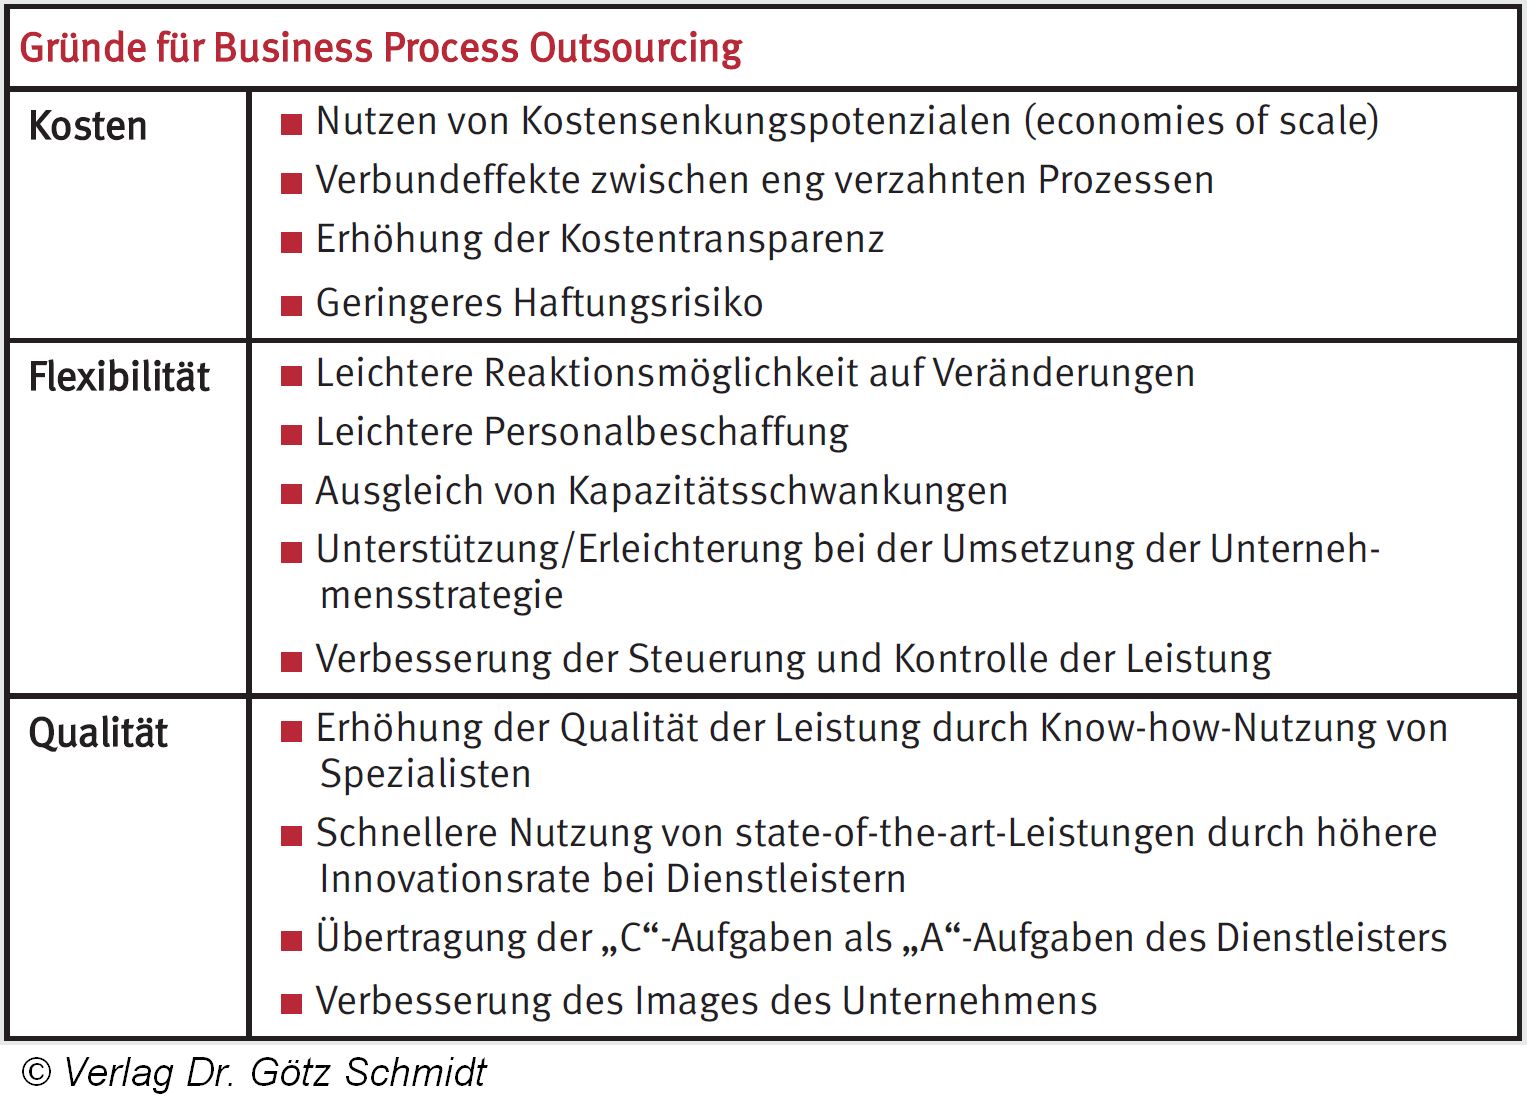 Abb. 1.76 Gruende fuer Business Process Outsourcing